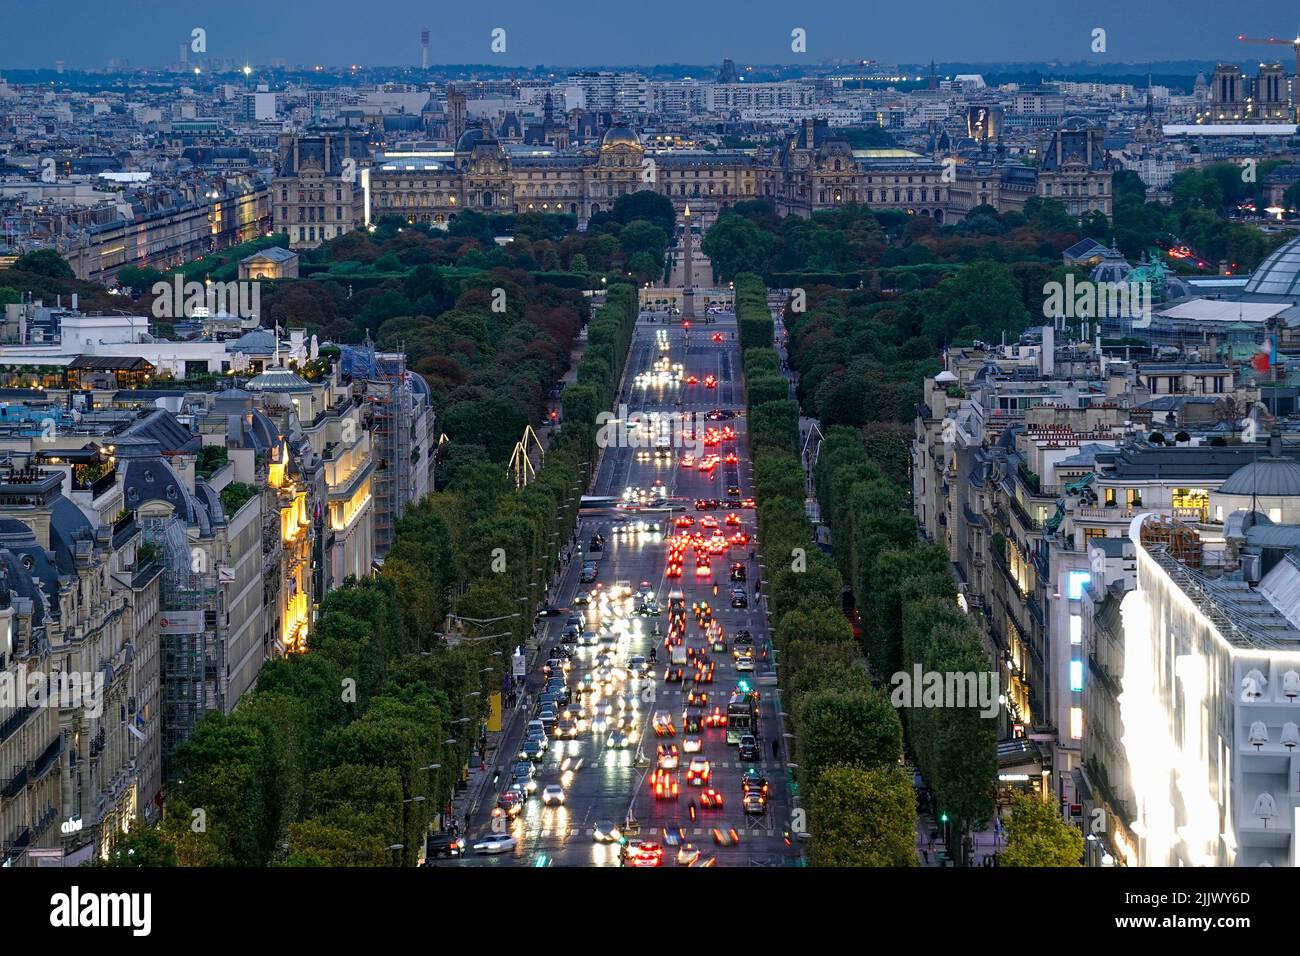 France, Paris, The Avenue des Champs-Elysees is an avenue in the 8th arrondissement, running between the Place de la Concorde in the east and the Plac Stock Photo